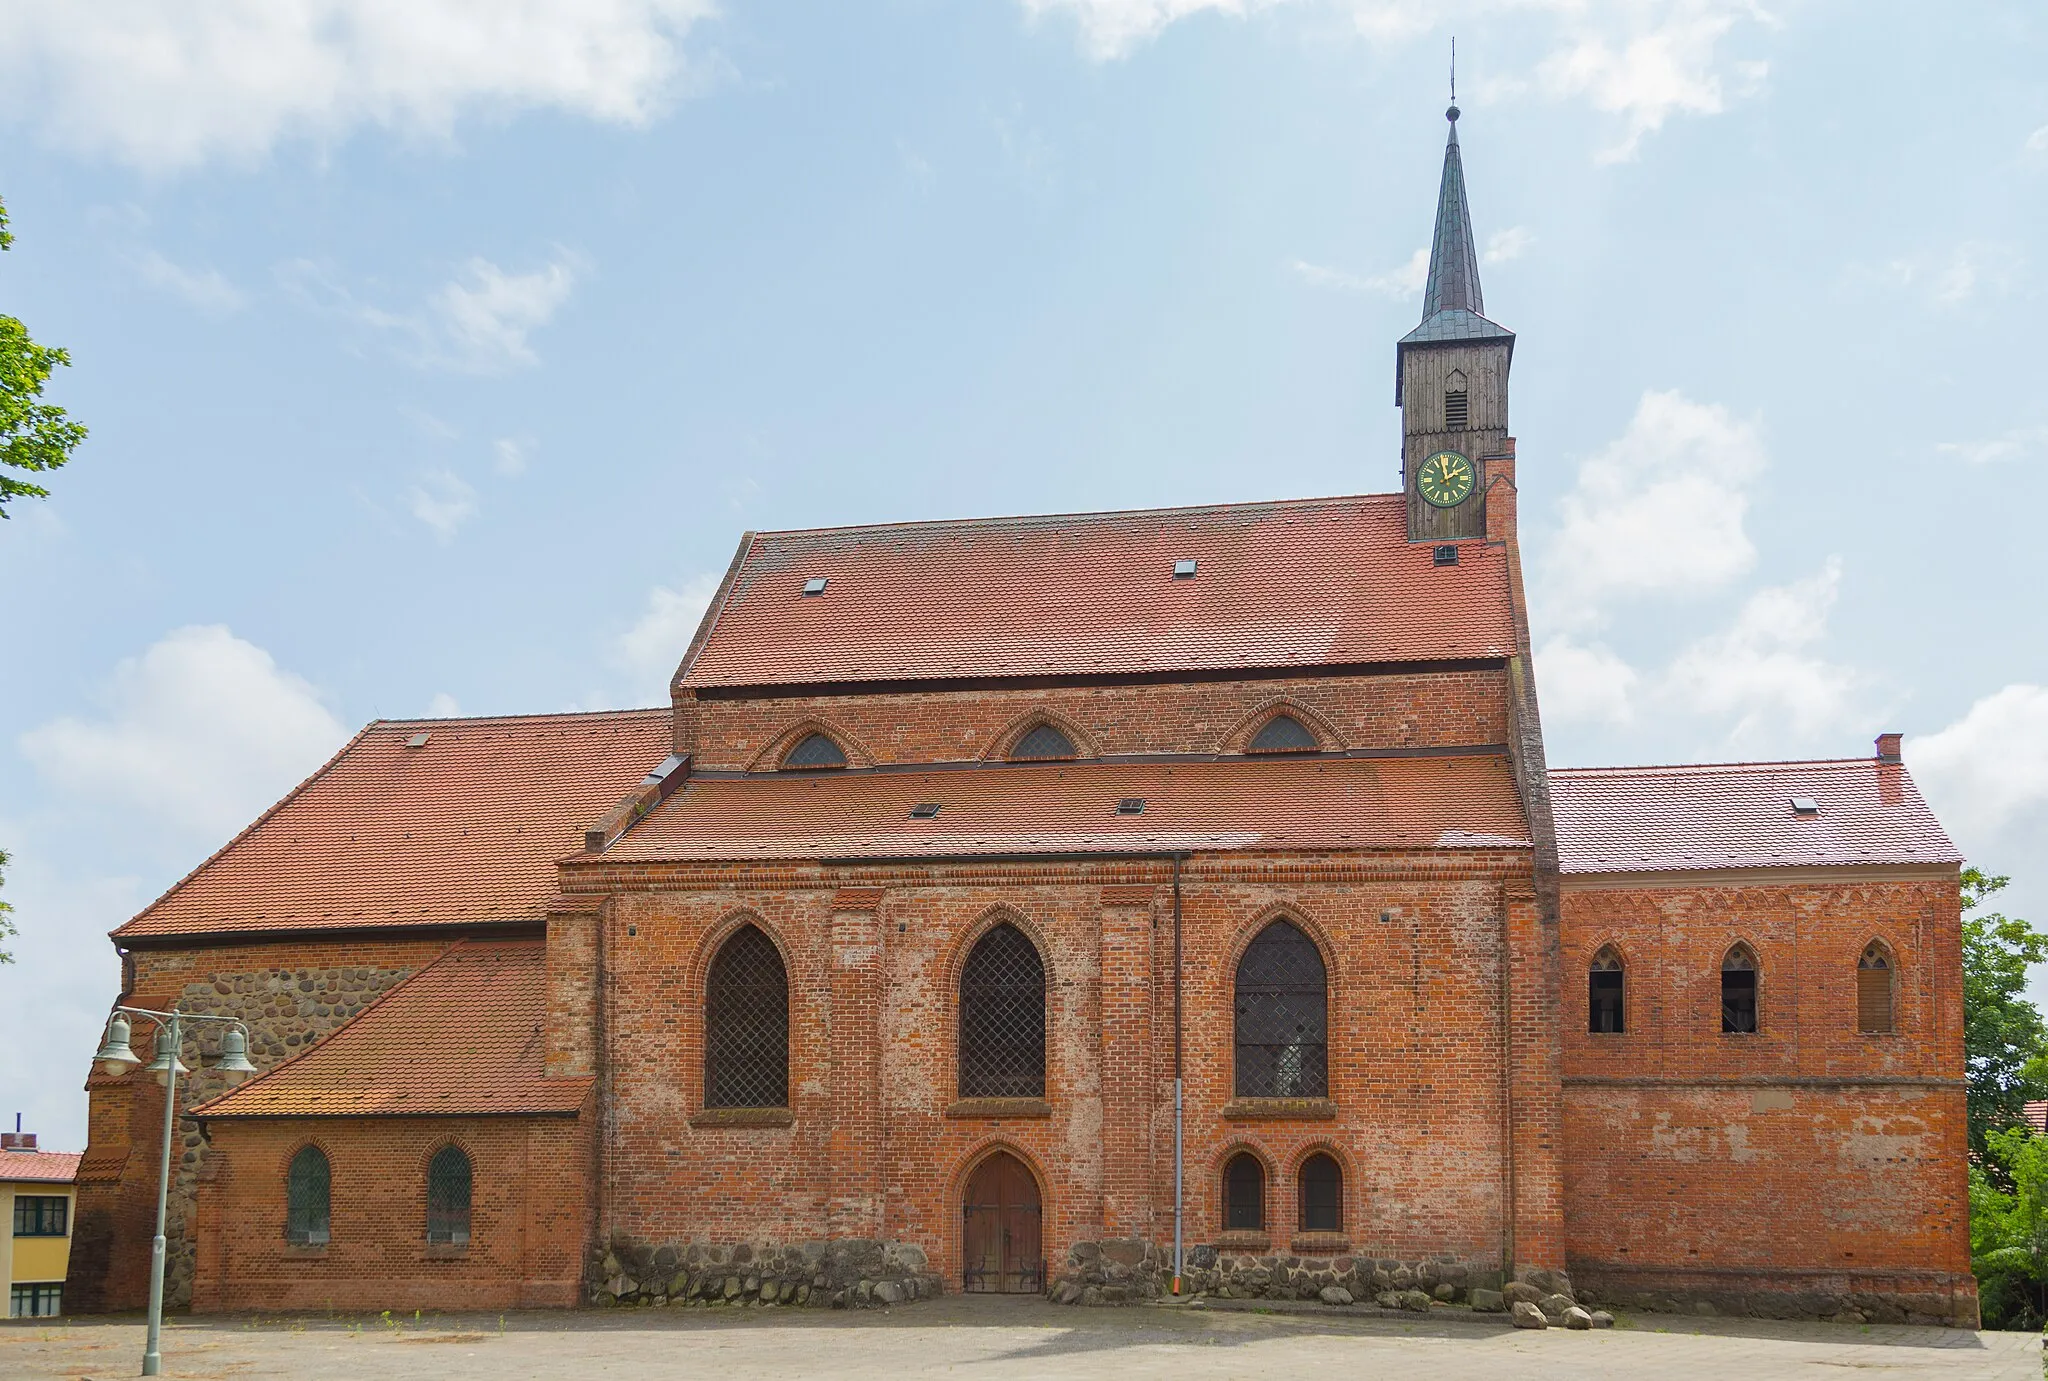 Photo showing: St John, the Protestant city church of Tessin near Rostock, Amt Tessin, Landkreis Rostock, Mecklenburg-Western Pomerania, Germany. The church is a listed cultural heritage monument.